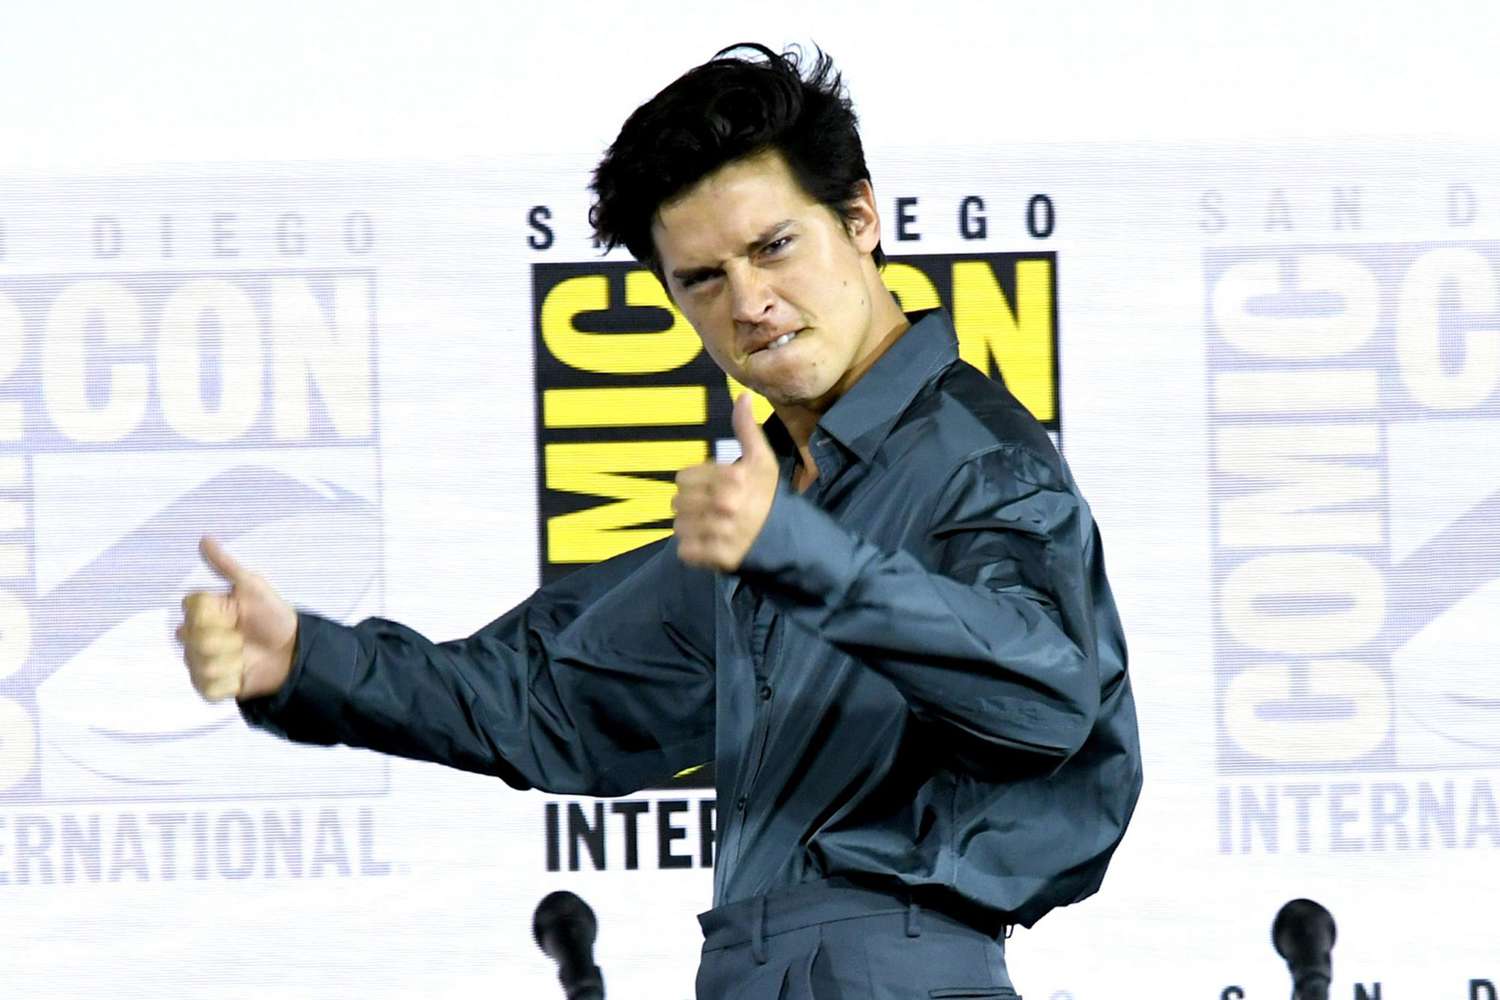 2019 Comic-Con International - "Riverdale" Special Video Presentation And Q&A